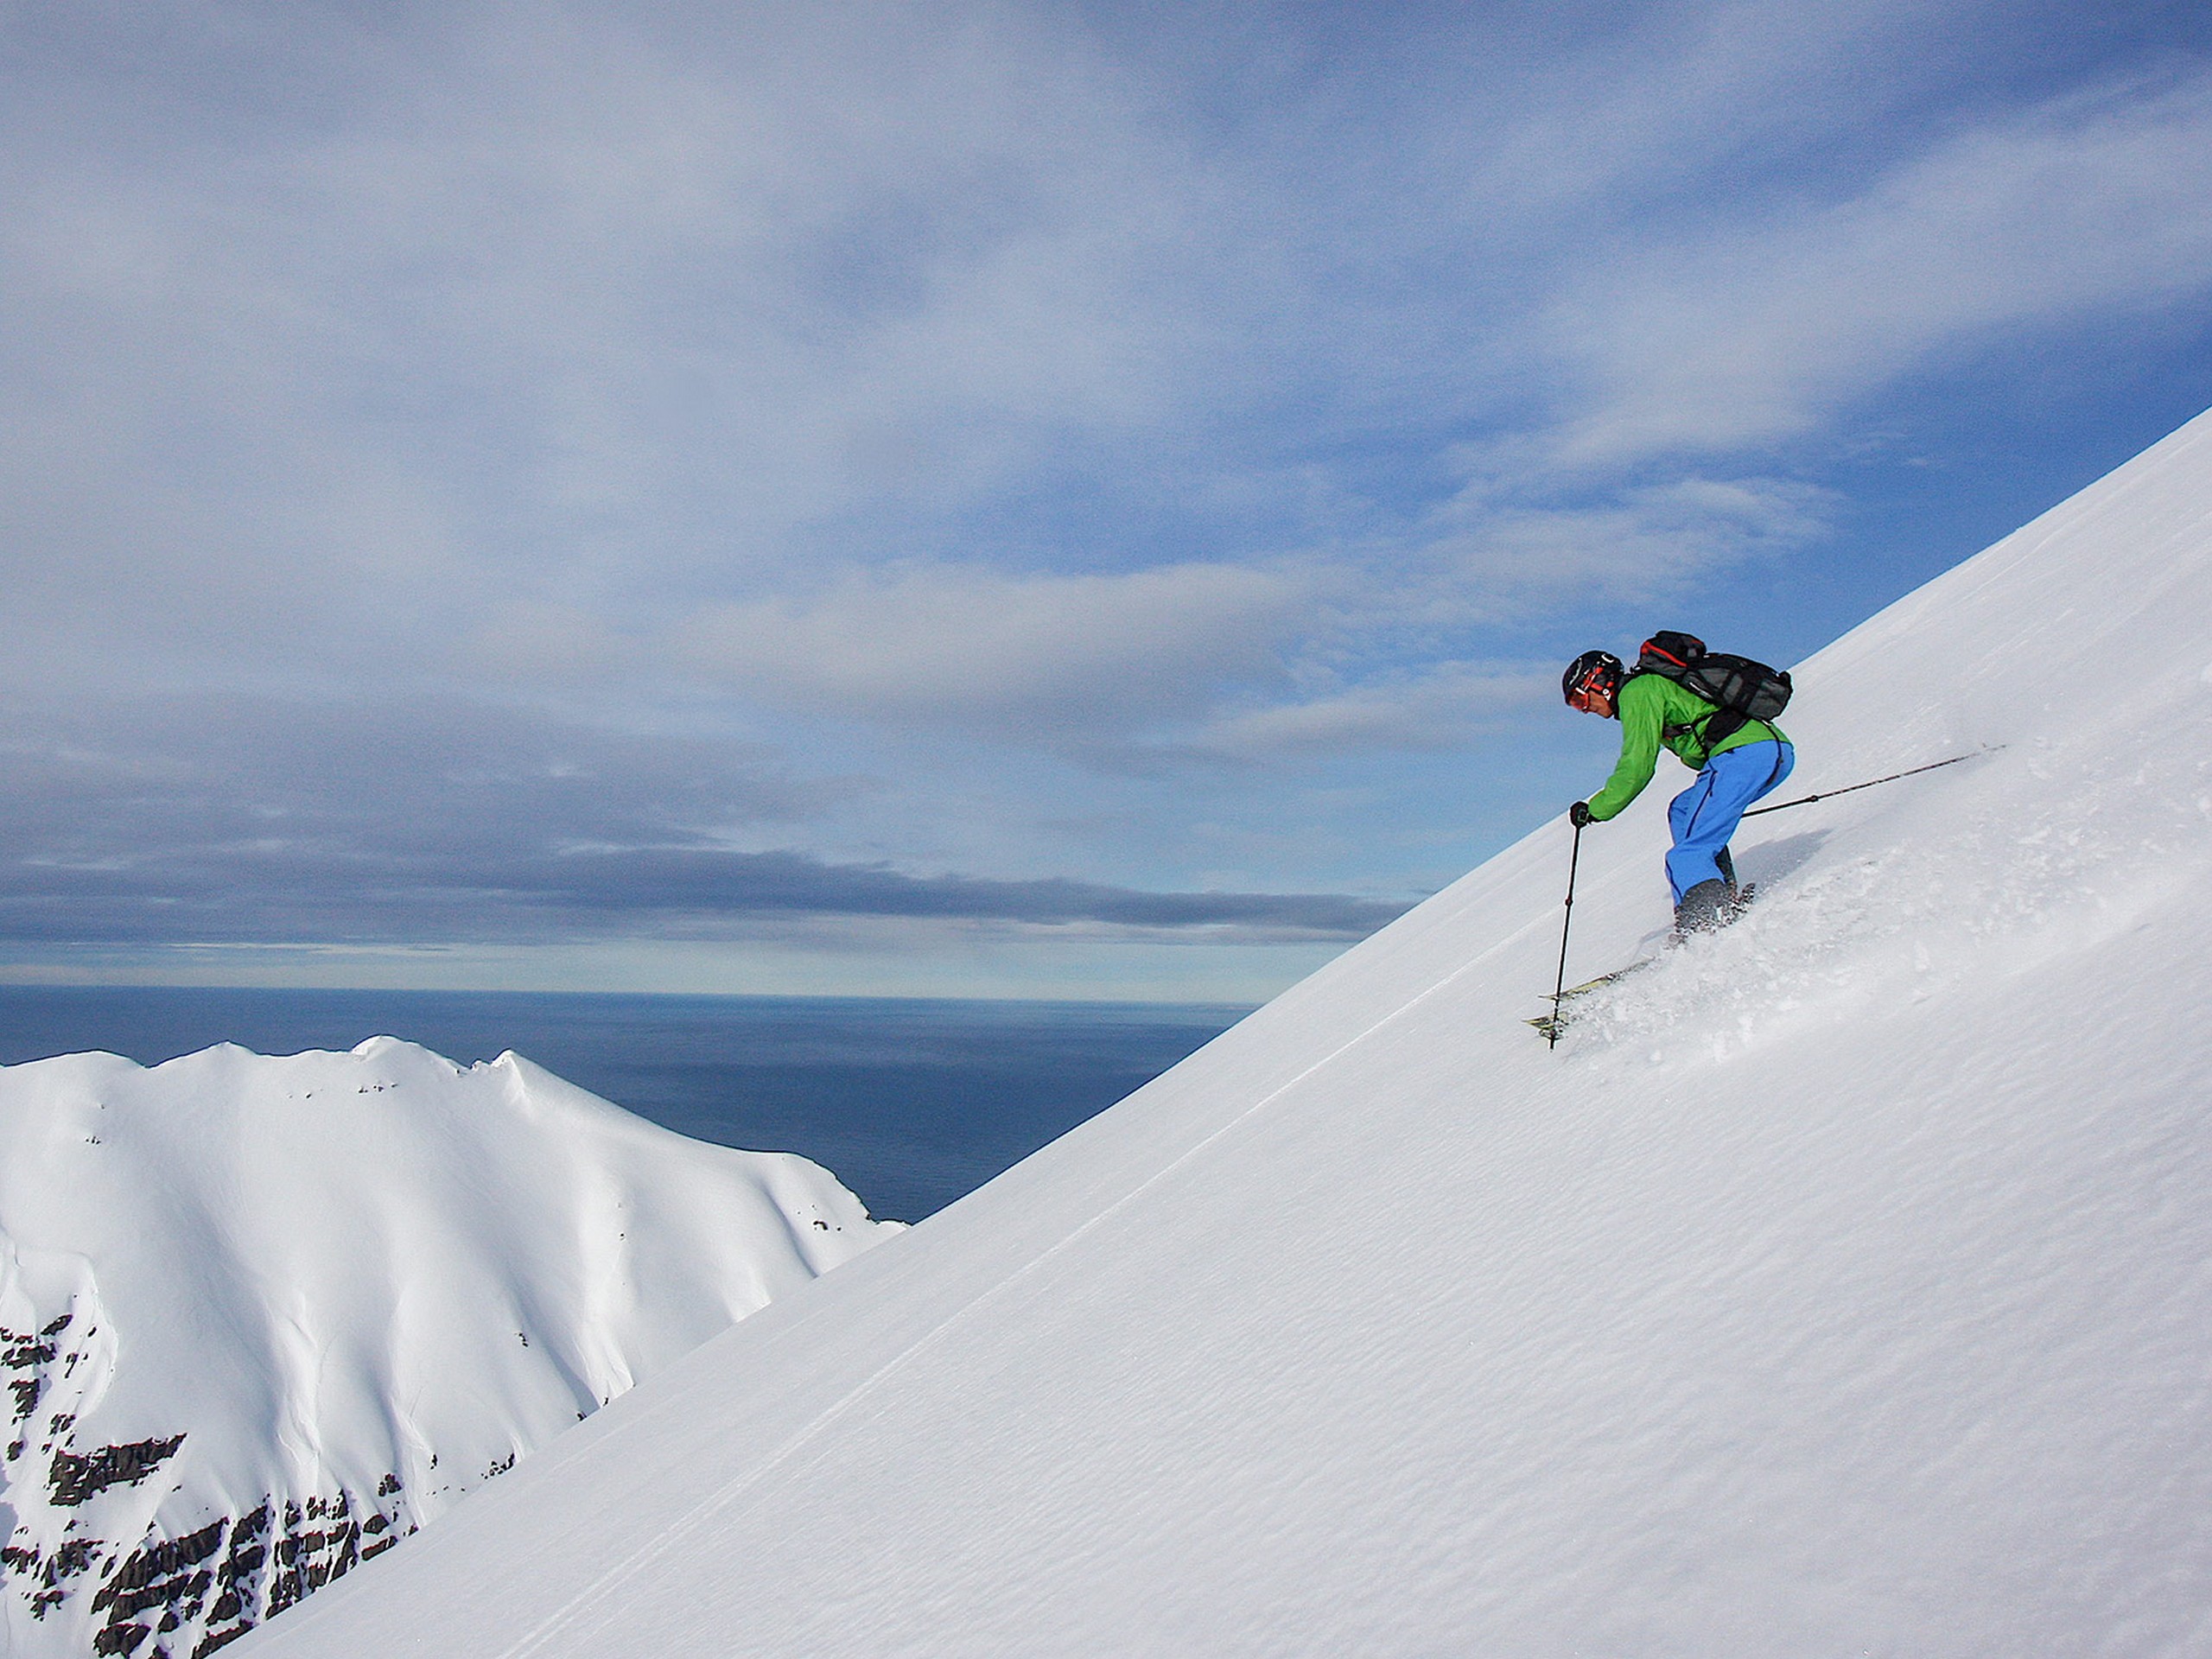 Skiing down one of the tallest Iceland's peaks - Photo by Guenter Kast